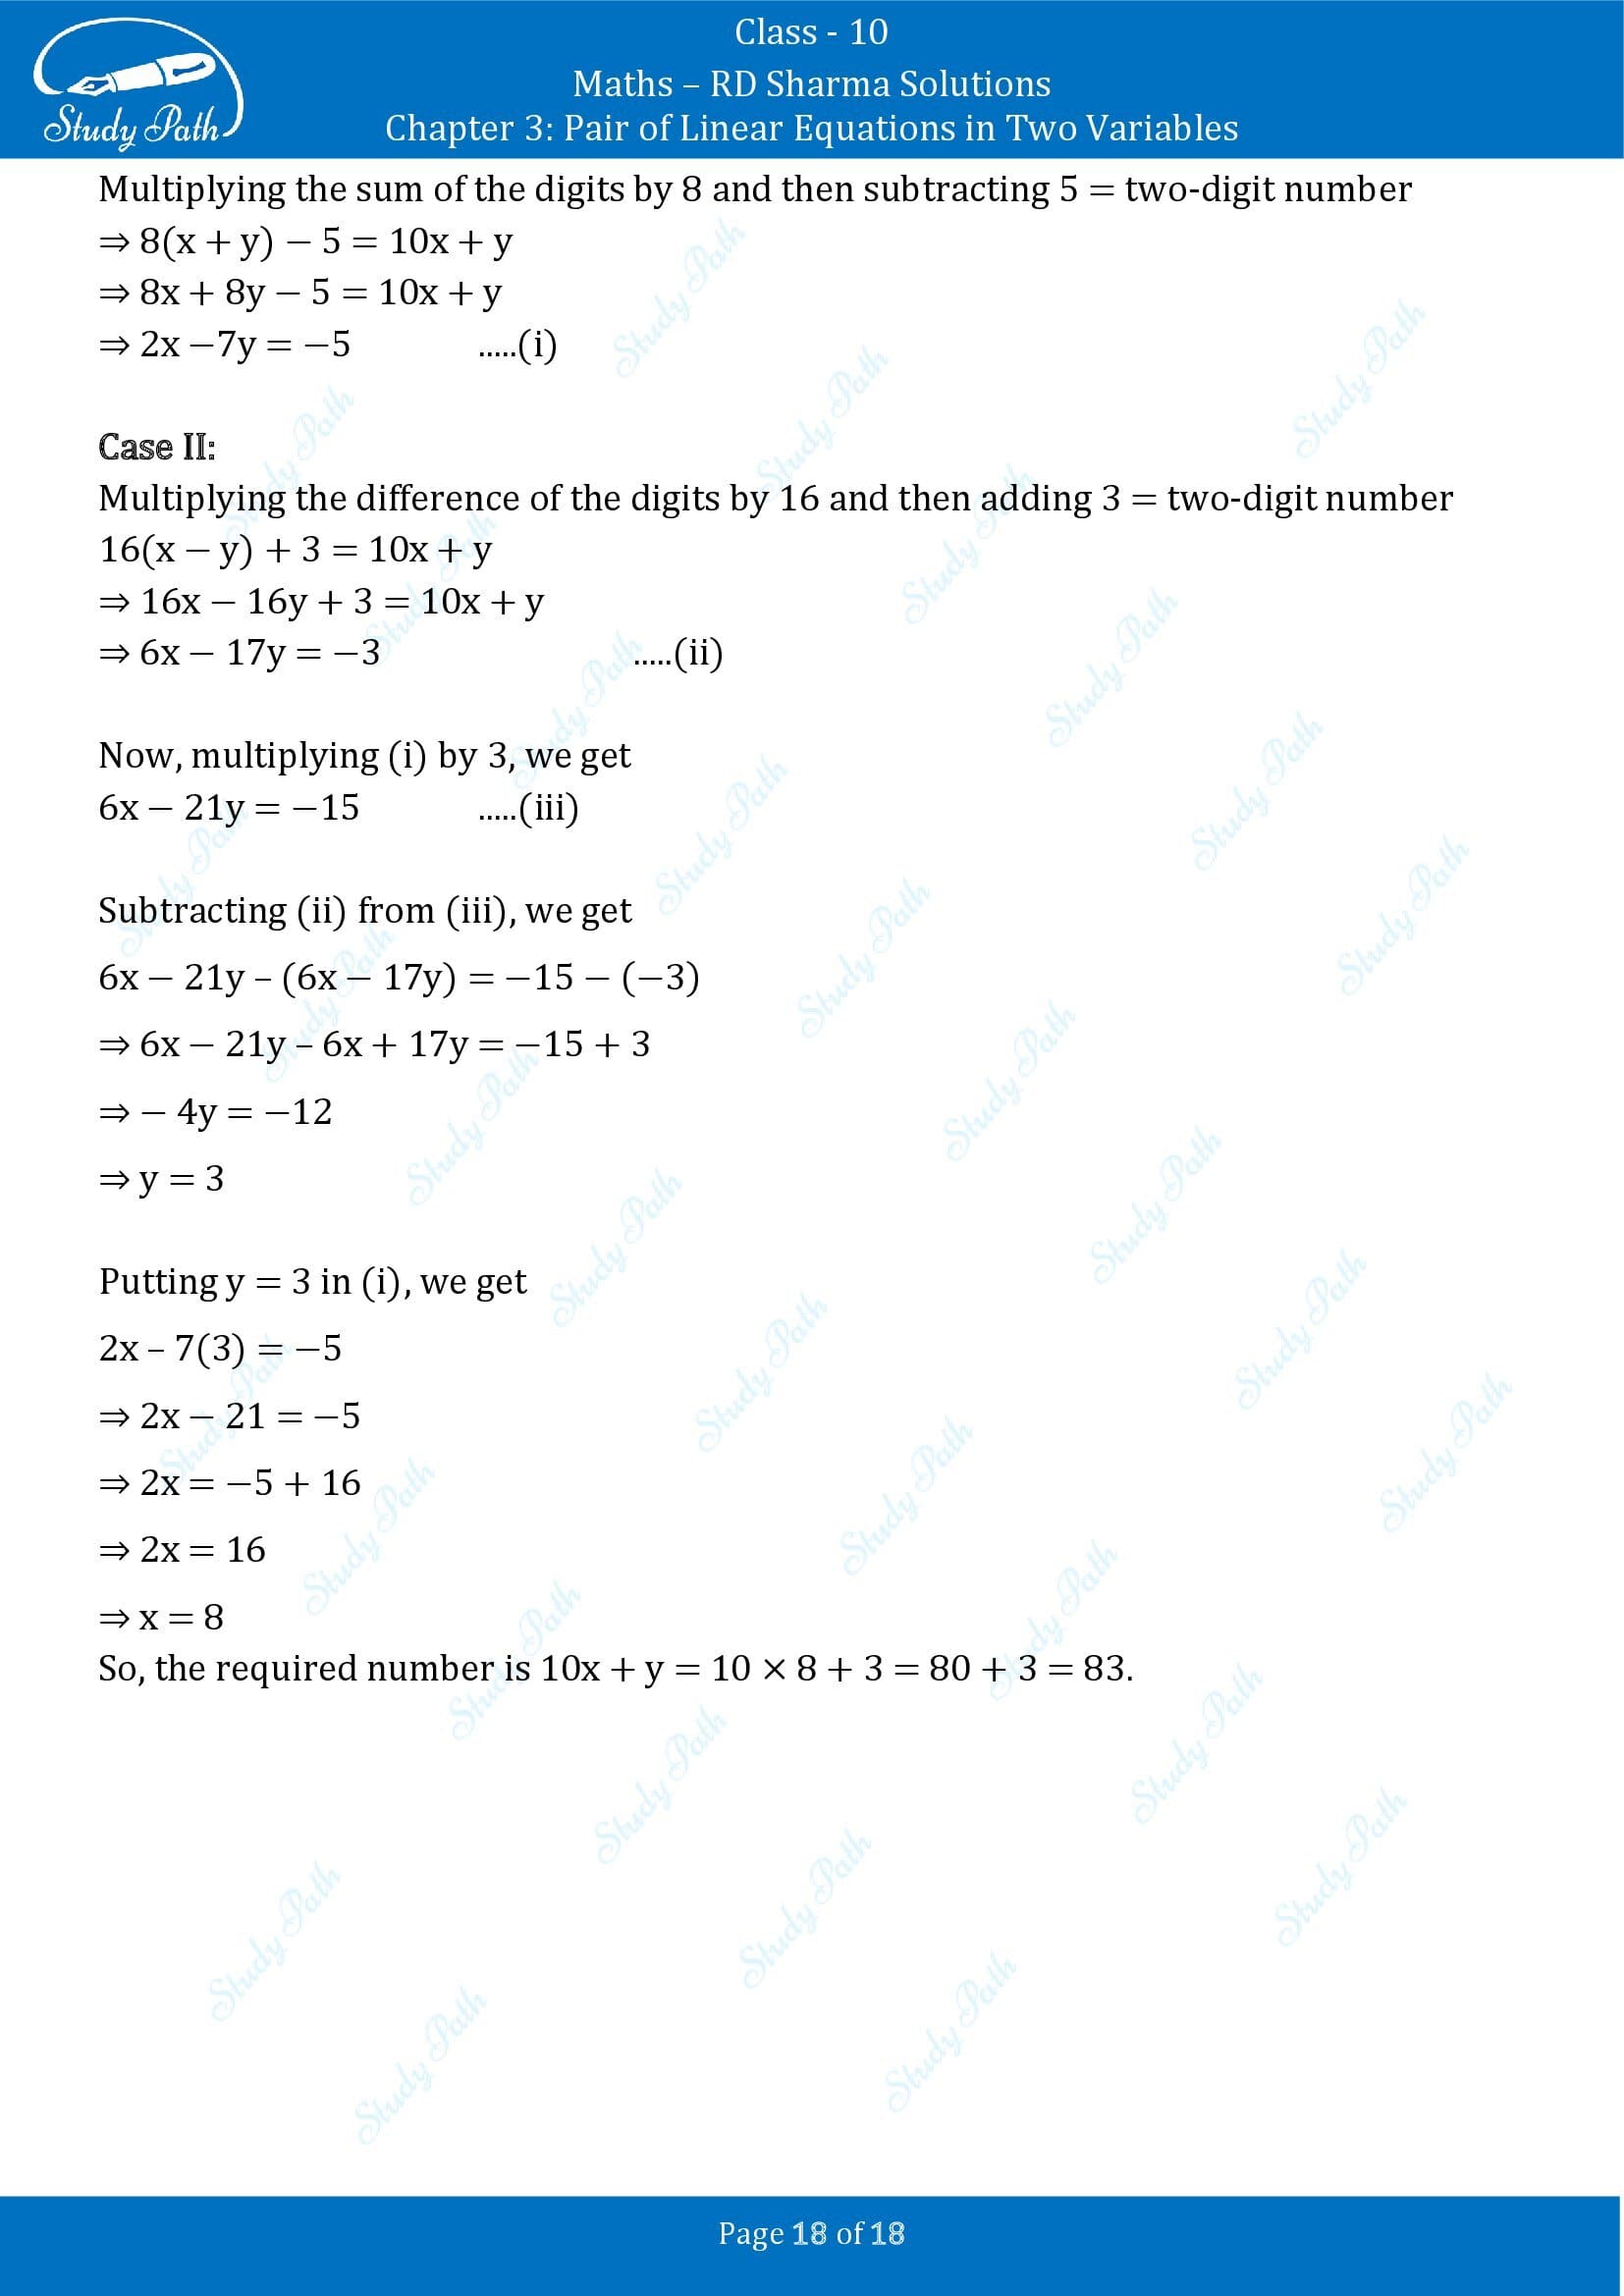 RD Sharma Solutions Class 10 Chapter 3 Pair of Linear Equations in Two Variables Exercise 3.7 00018